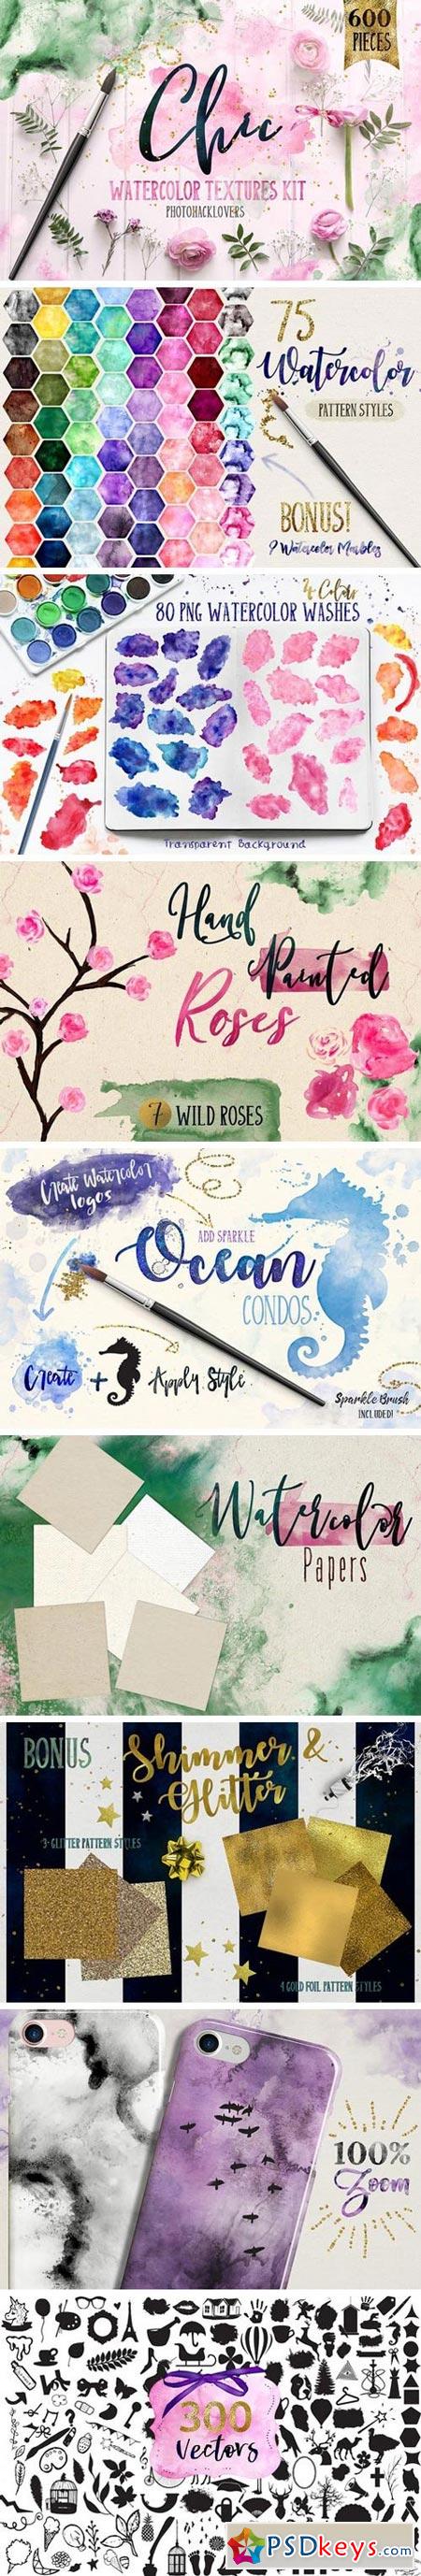 Chic watercolor Textures kit 1941315